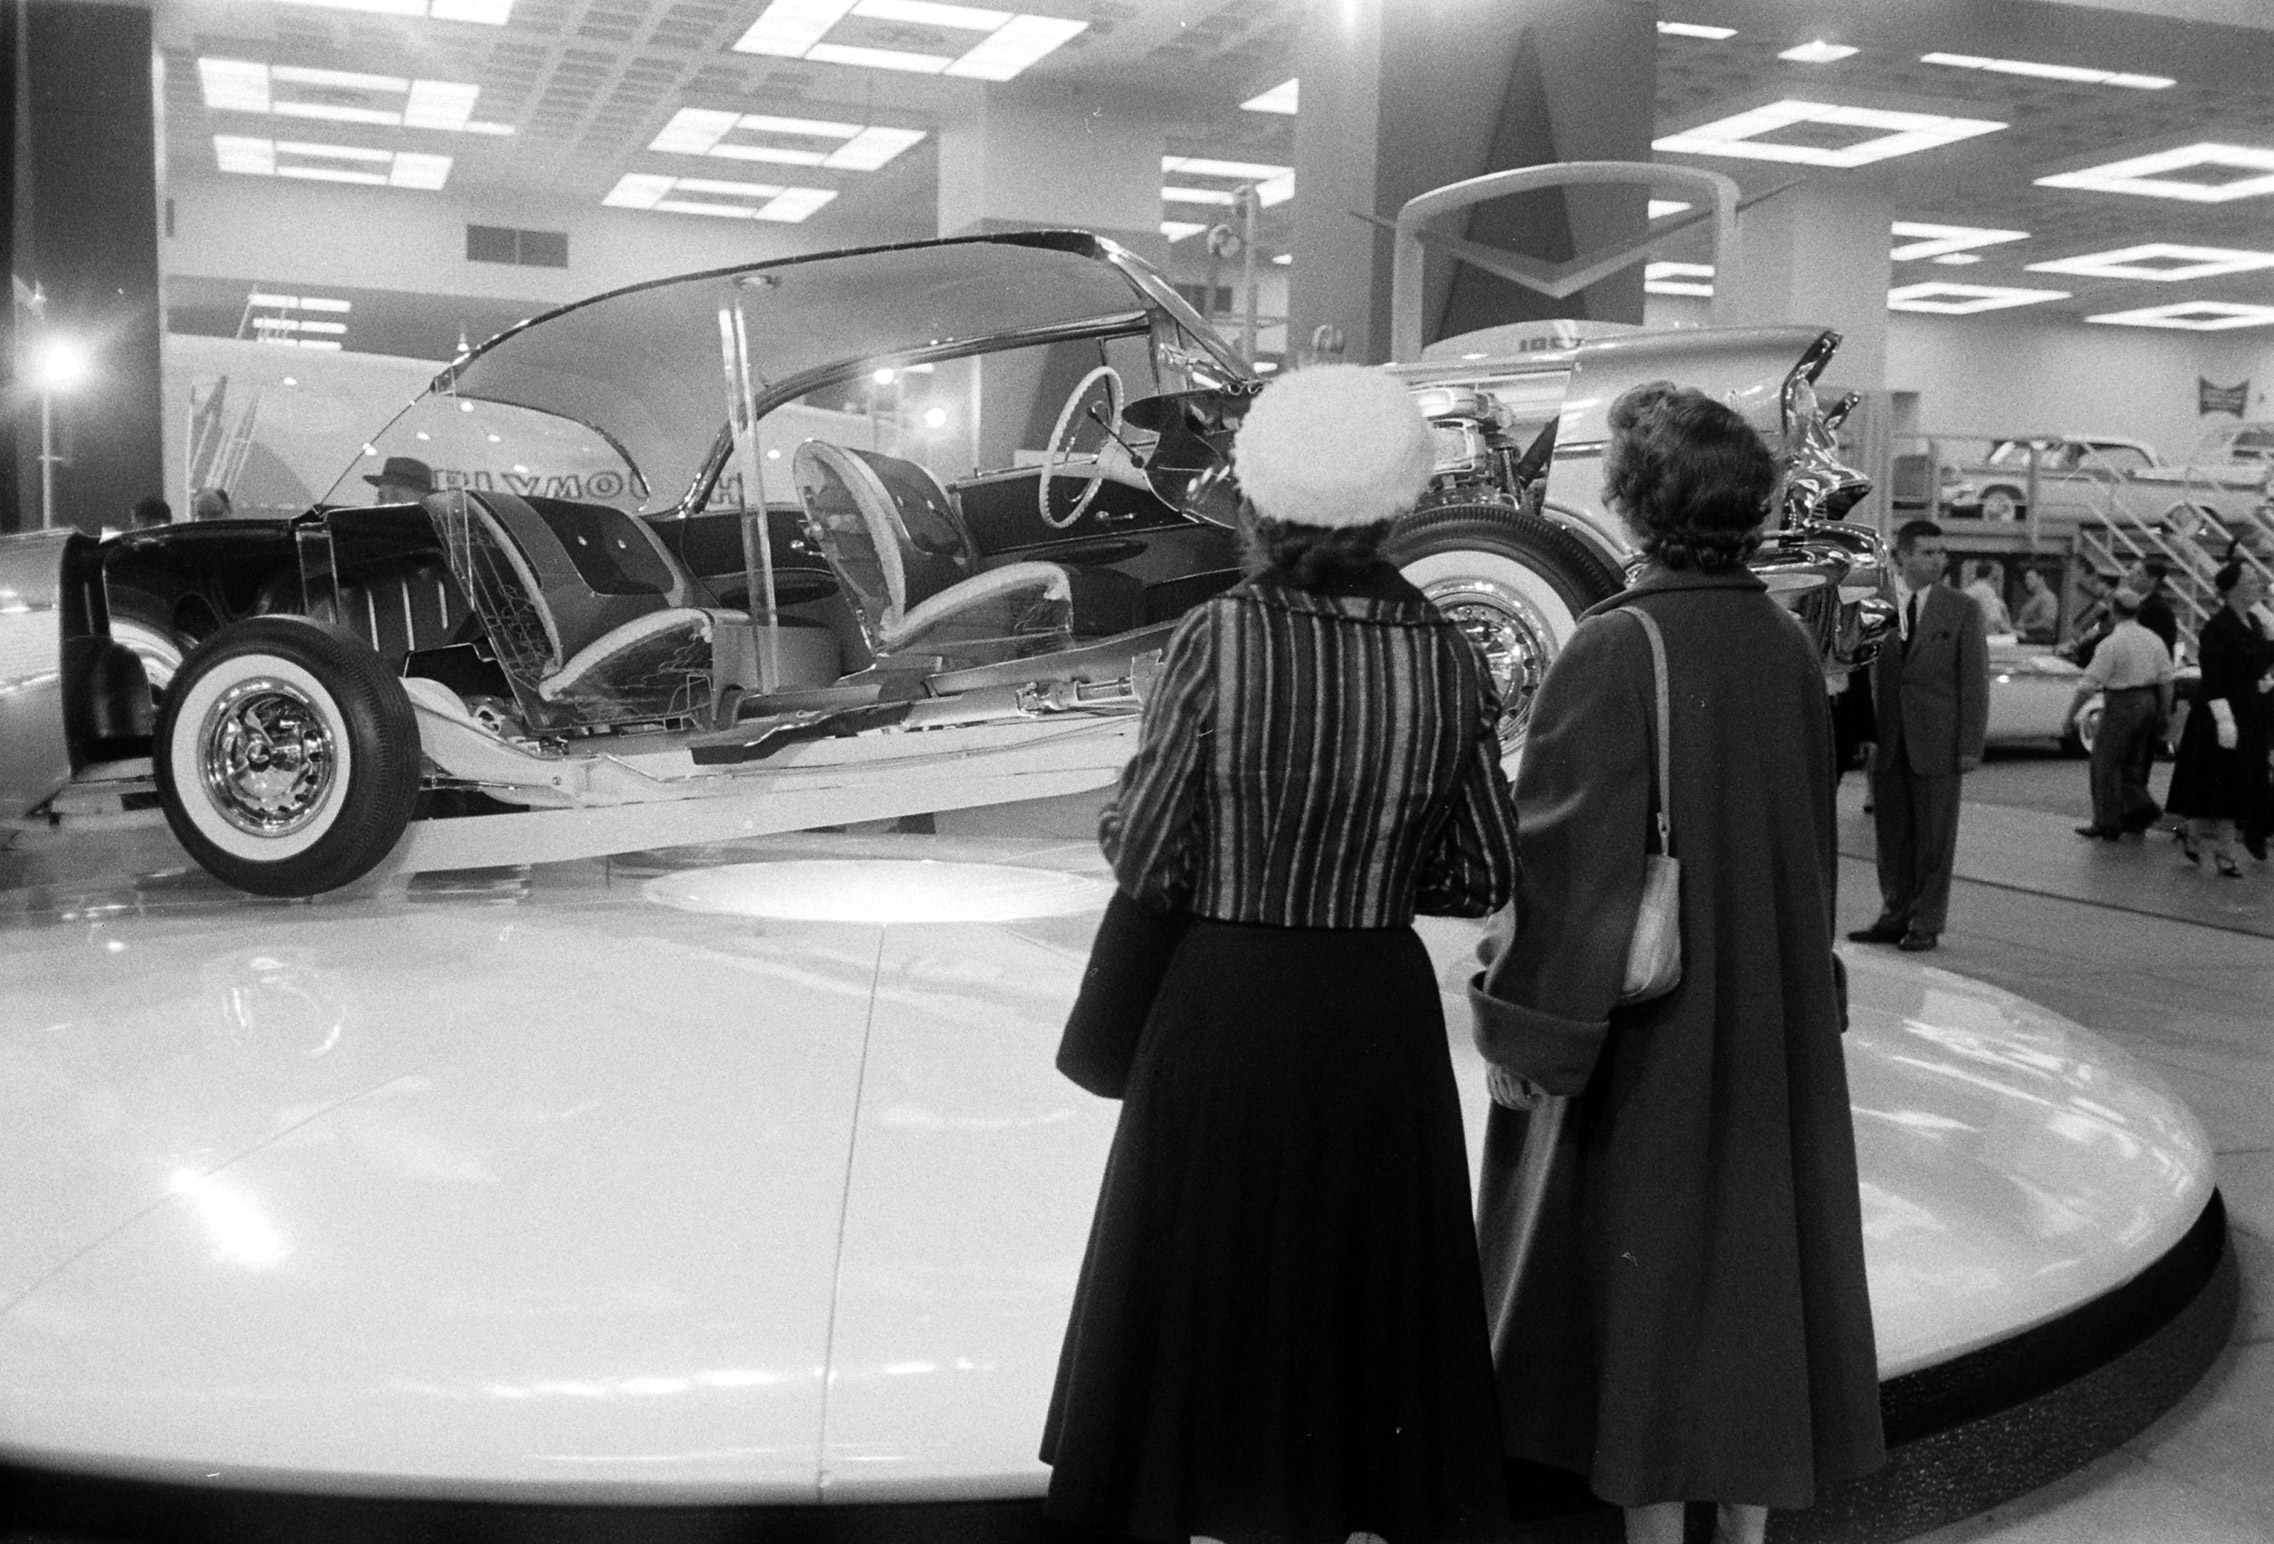 National Automobile Show at the New York Coliseum featuring 1957 lines.